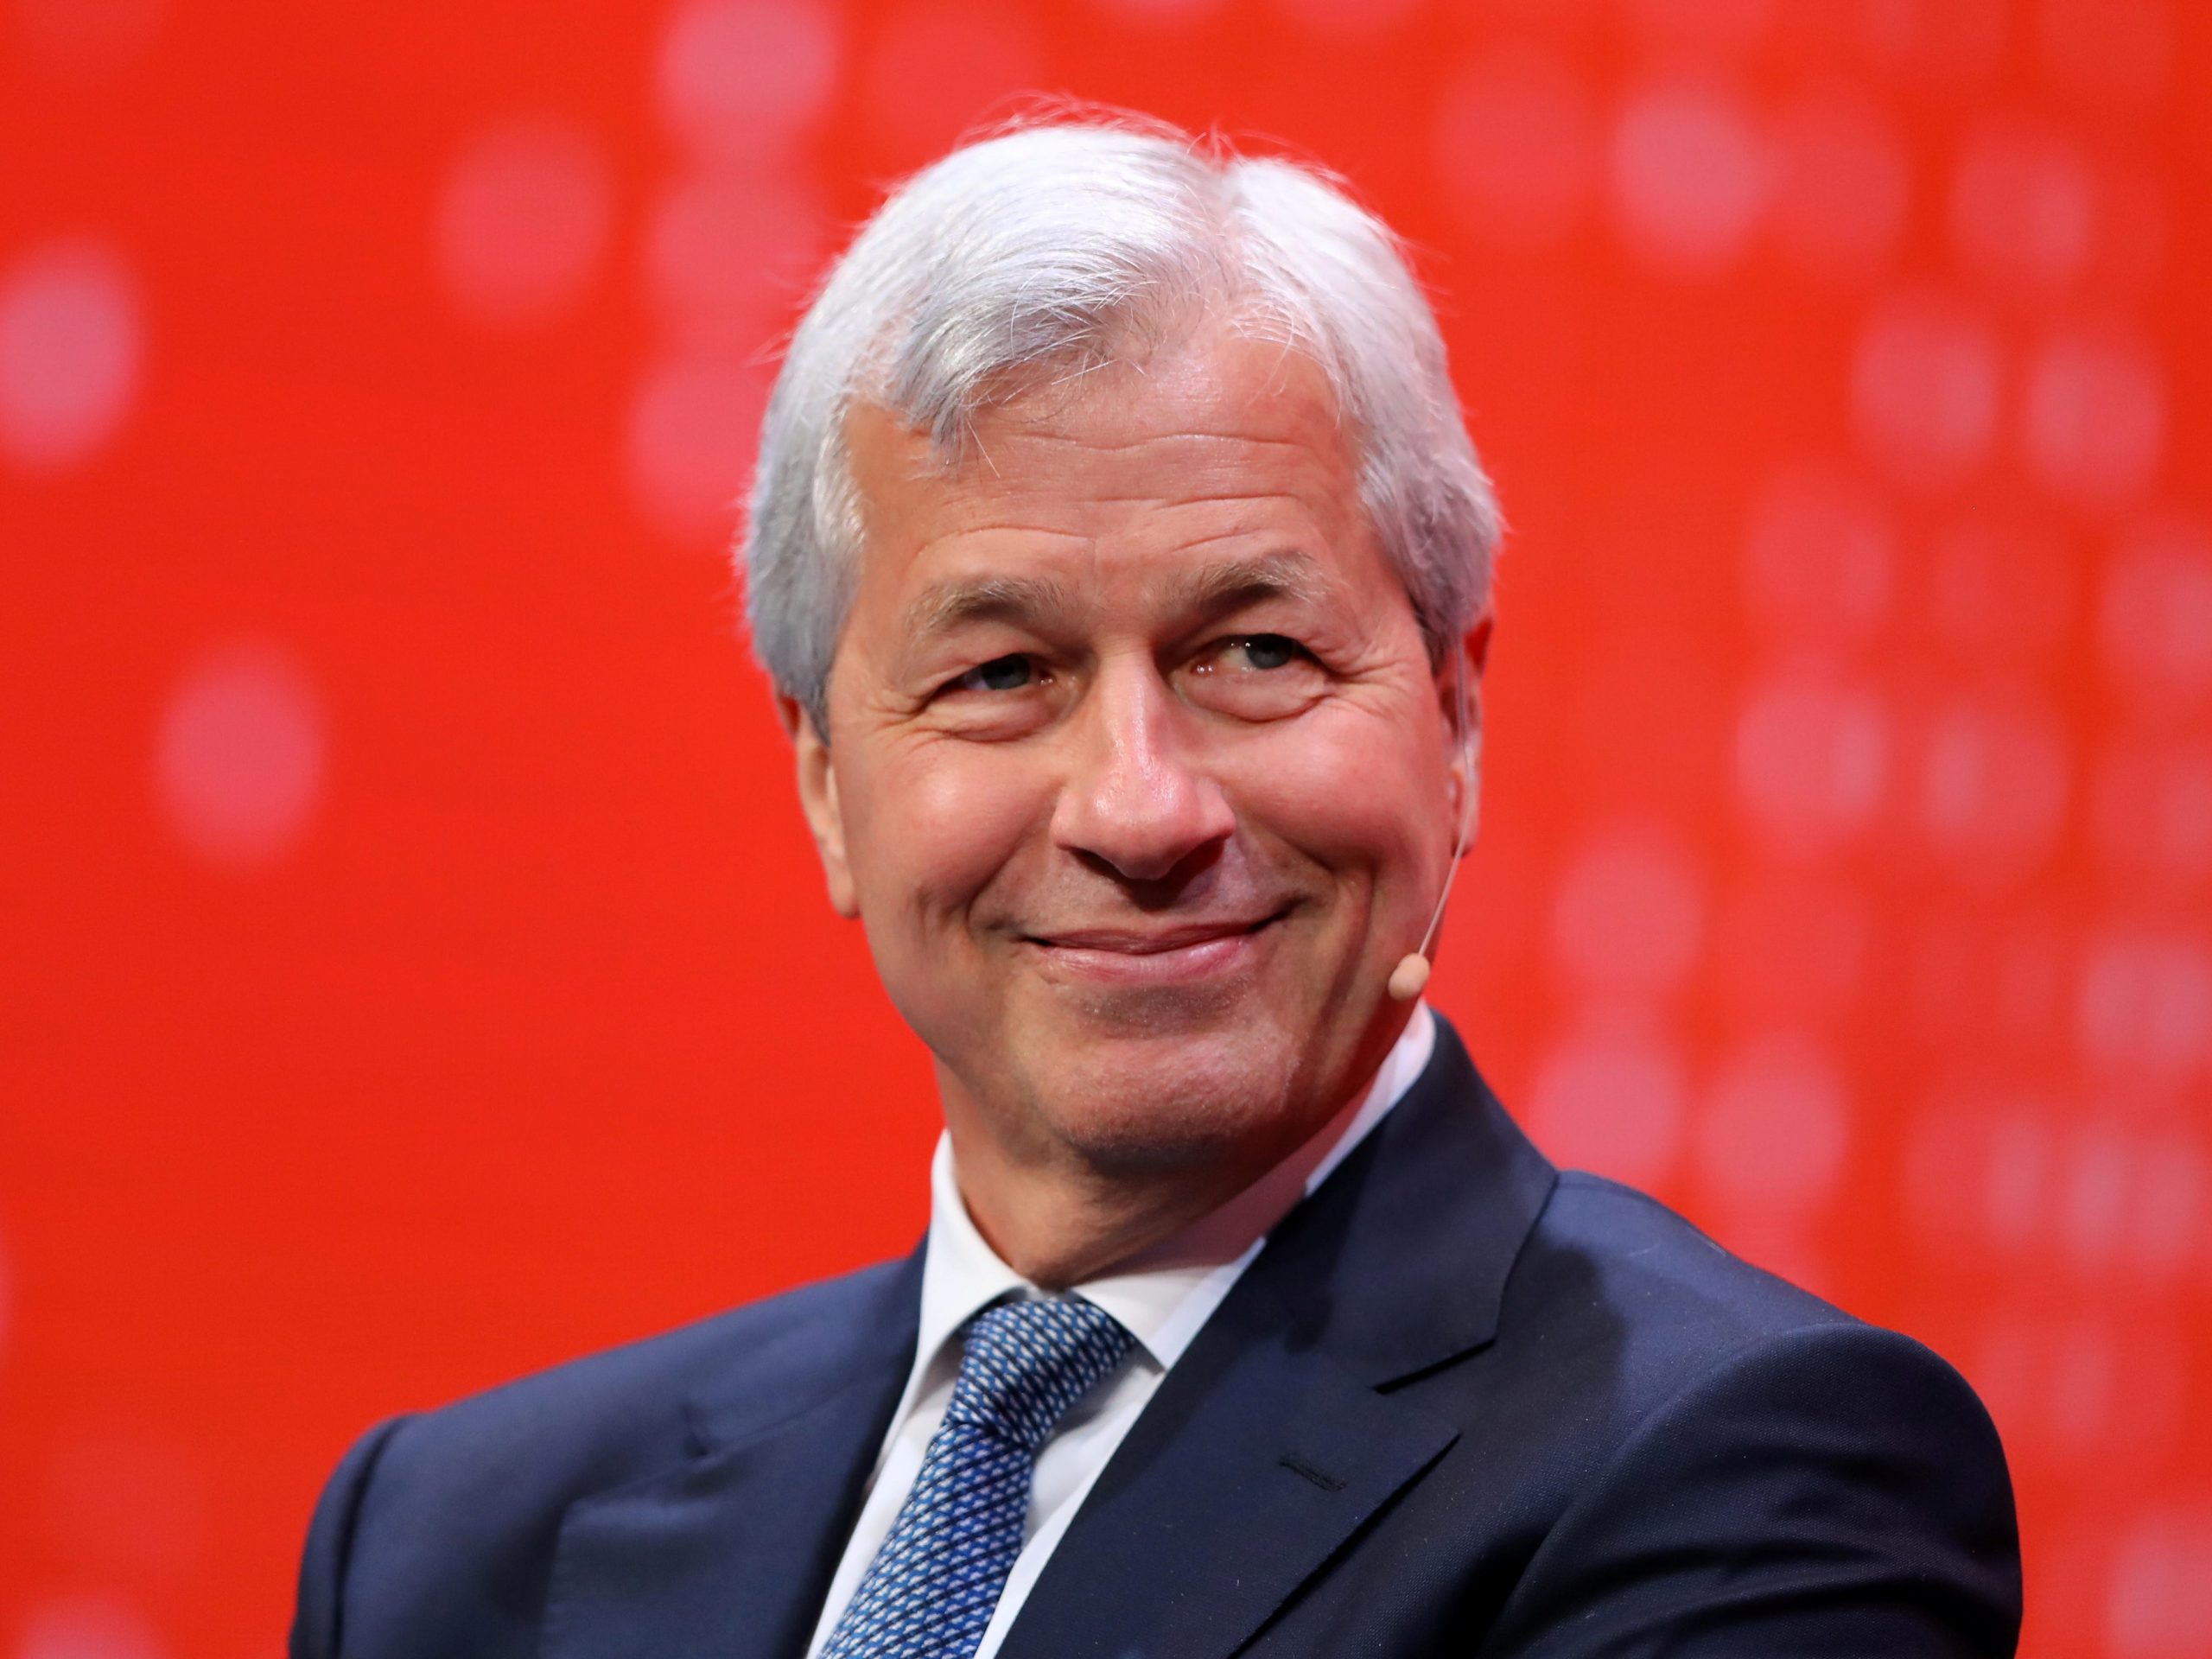 Jamie Dimon smiling and looking to the right against a red background